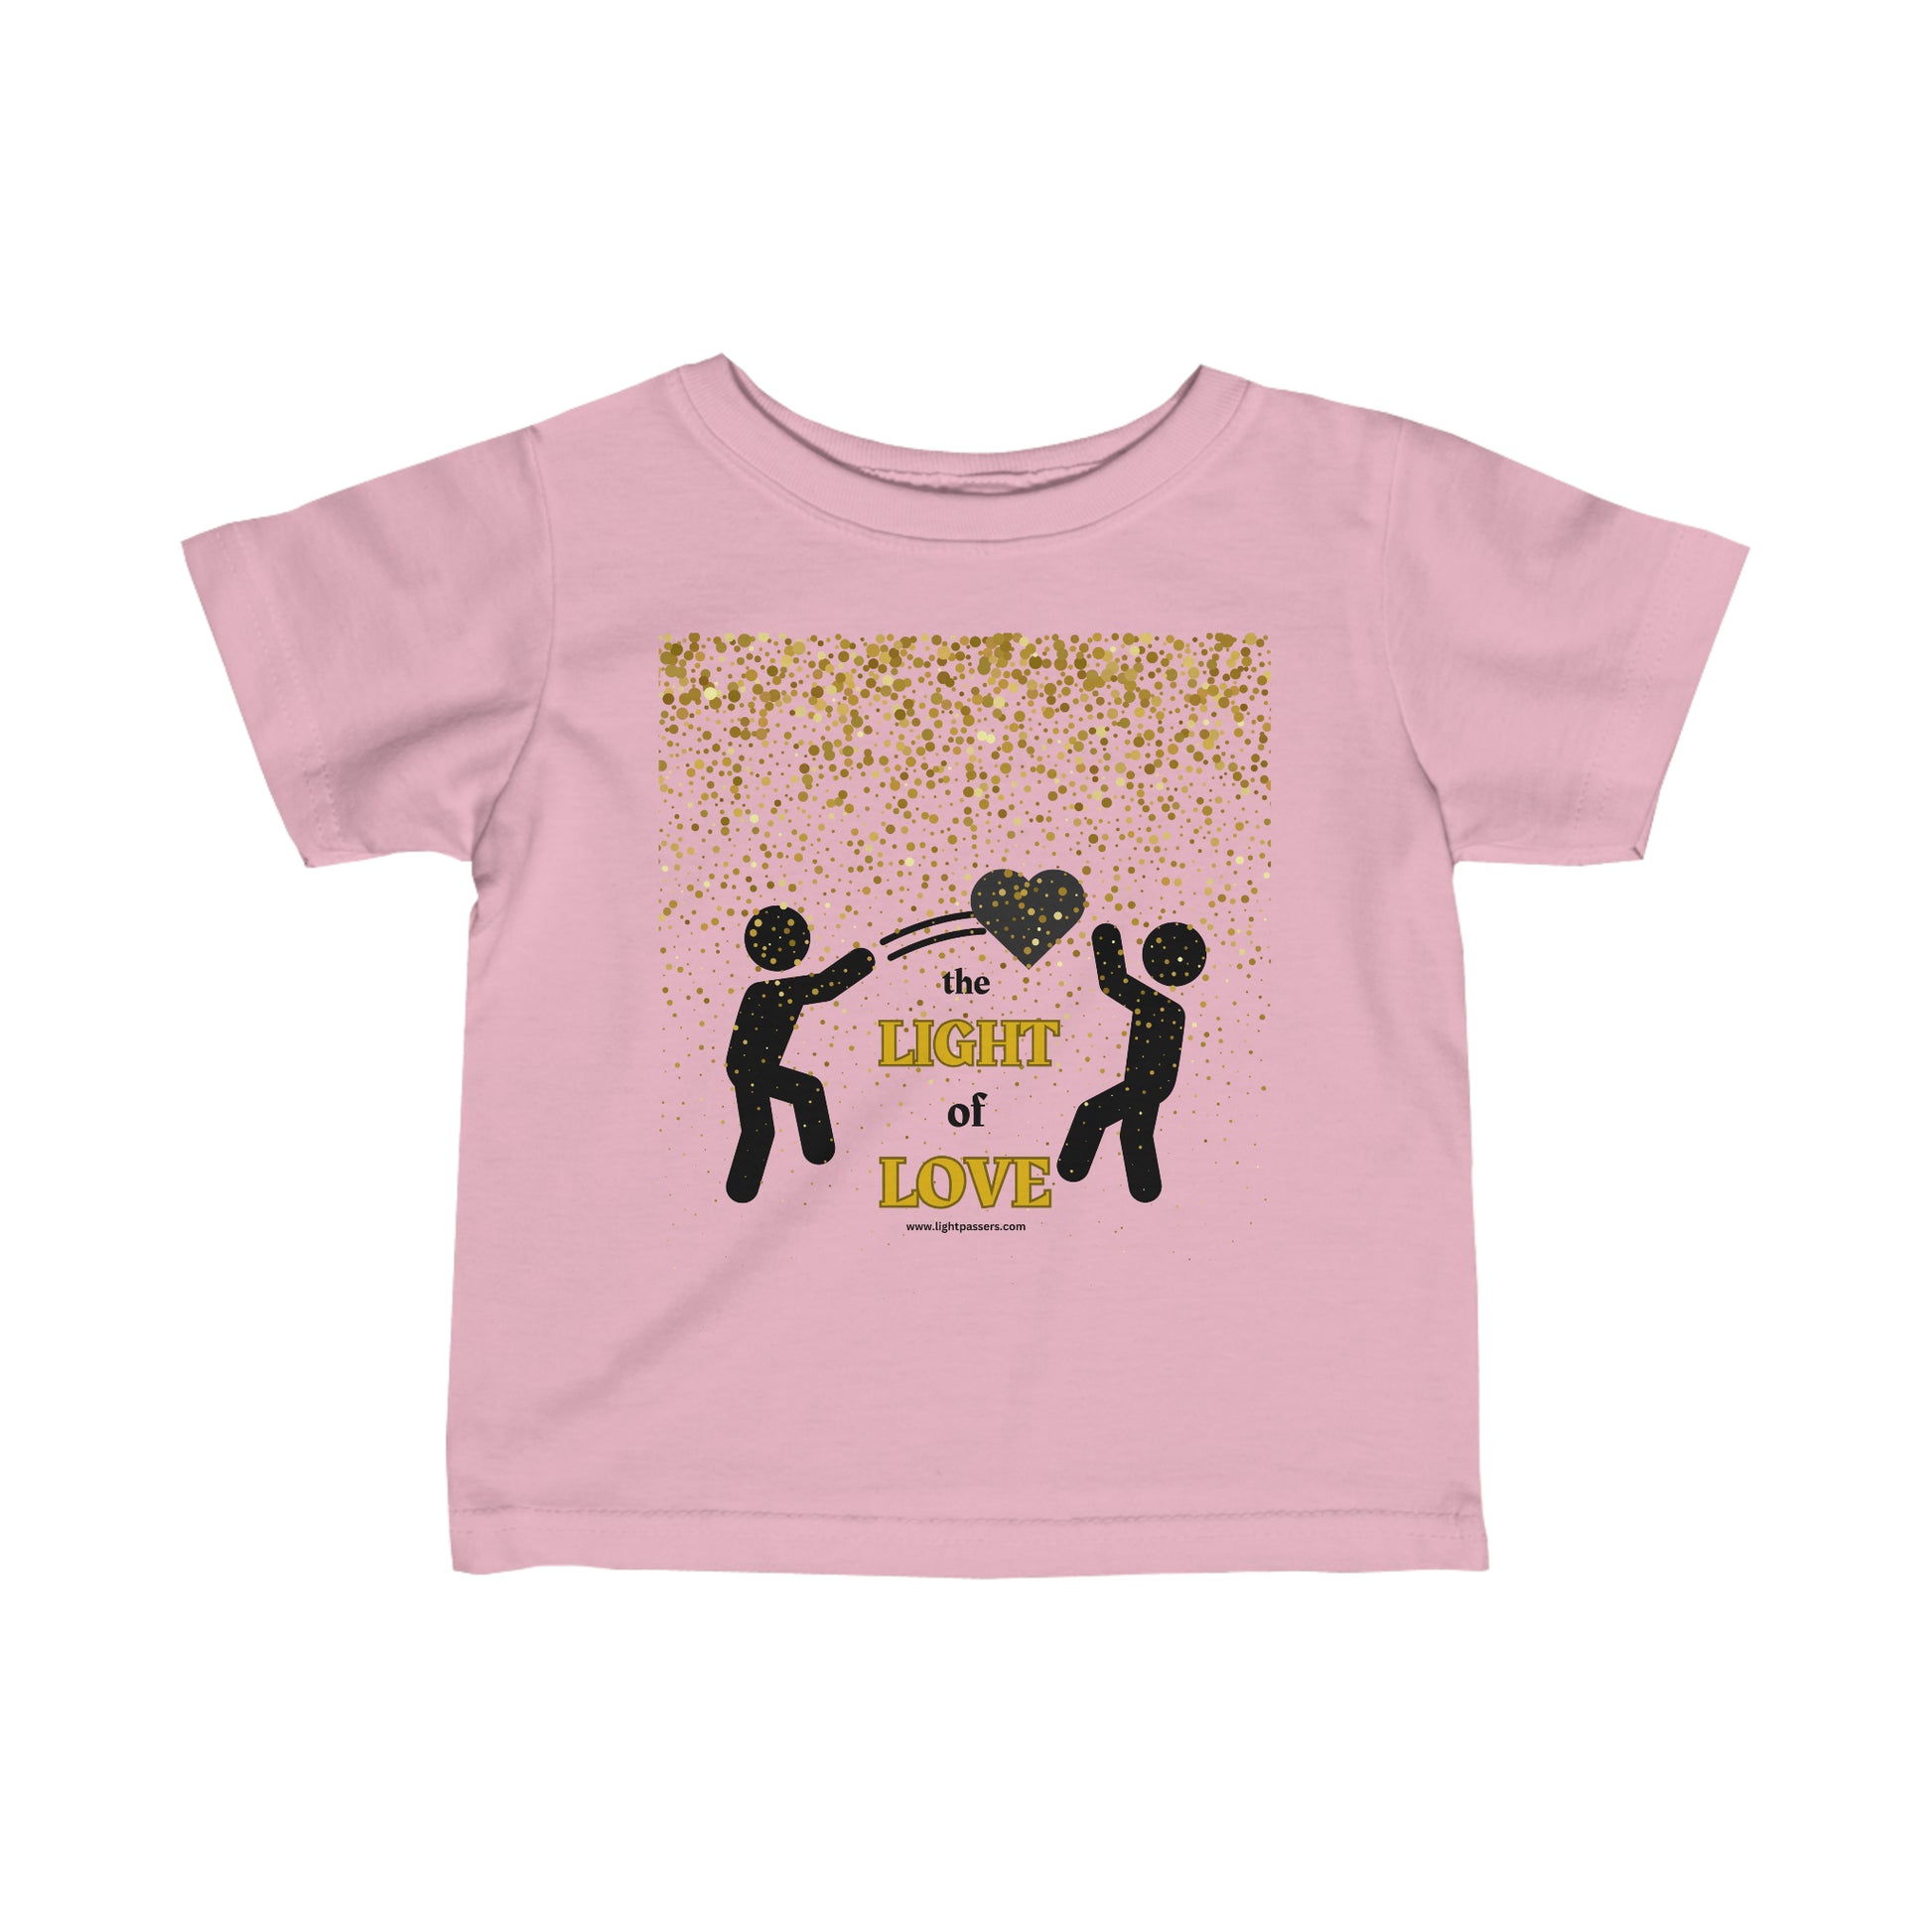 Infant fine jersey tee with a Light of Love Gold Heart design, featuring a pink shirt with black and gold text, a silhouette of a person holding a hat, and confetti.